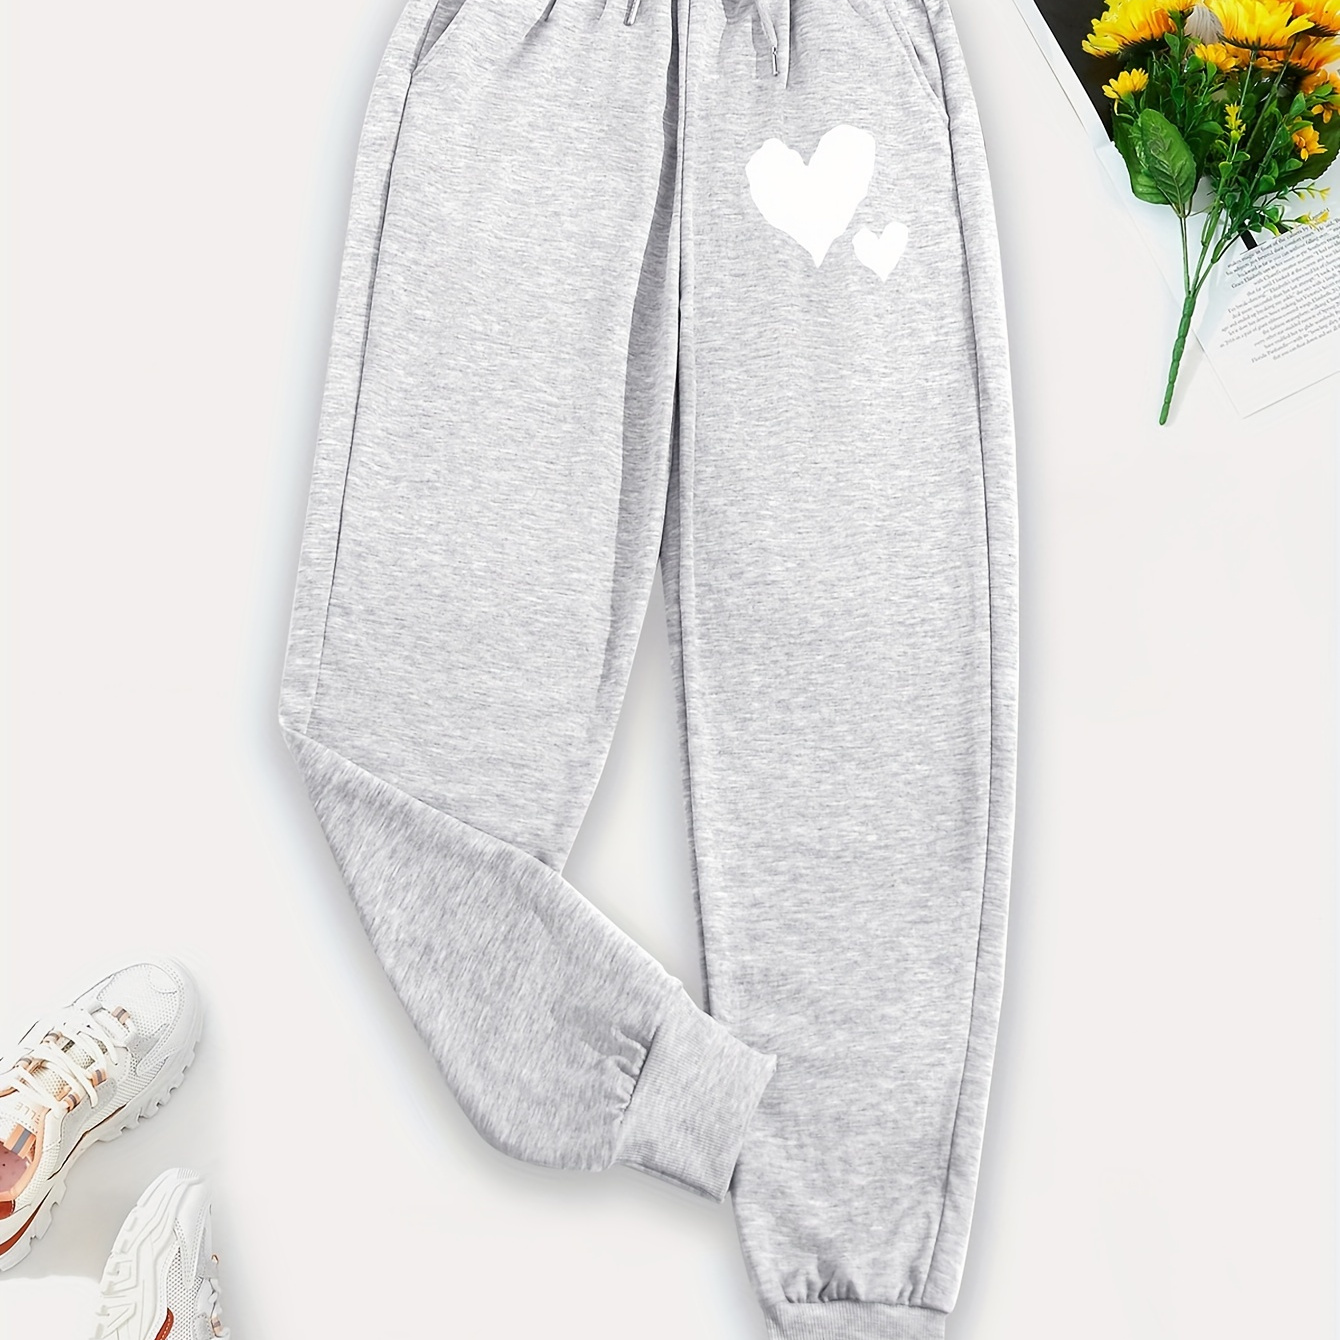 

Heart Print Jogger Sweatpants, Casual Drawstring Sporty Pants With Pocket, Women's Clothing